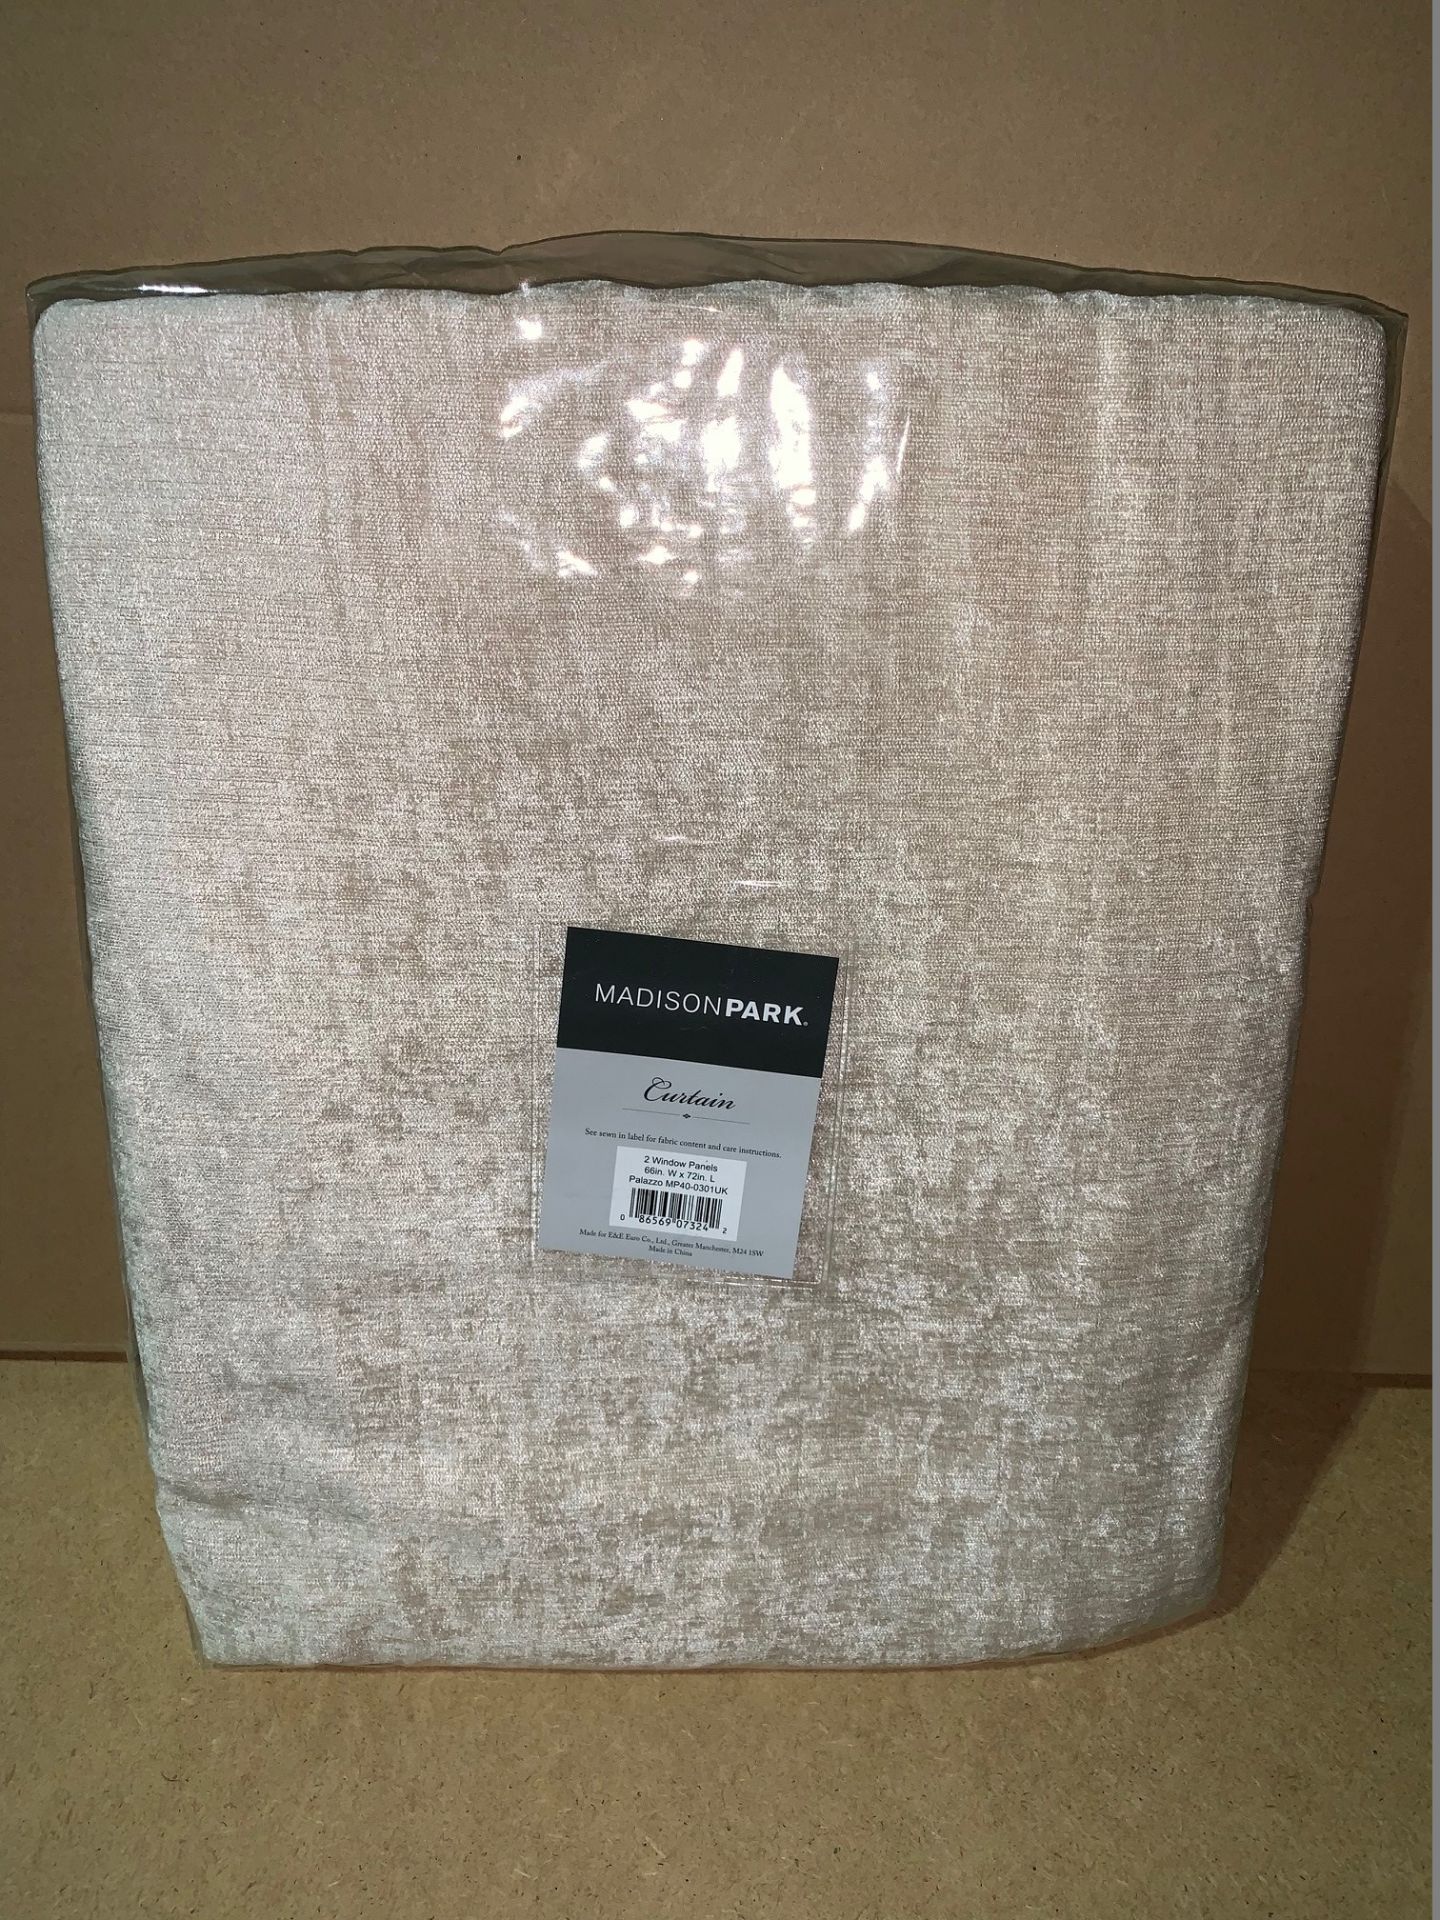 1 x Set of Madison Park Palazzo Chenille Ivory Curtains 66x72" - Product Code MP40-0301UK (Brand New - Image 2 of 3